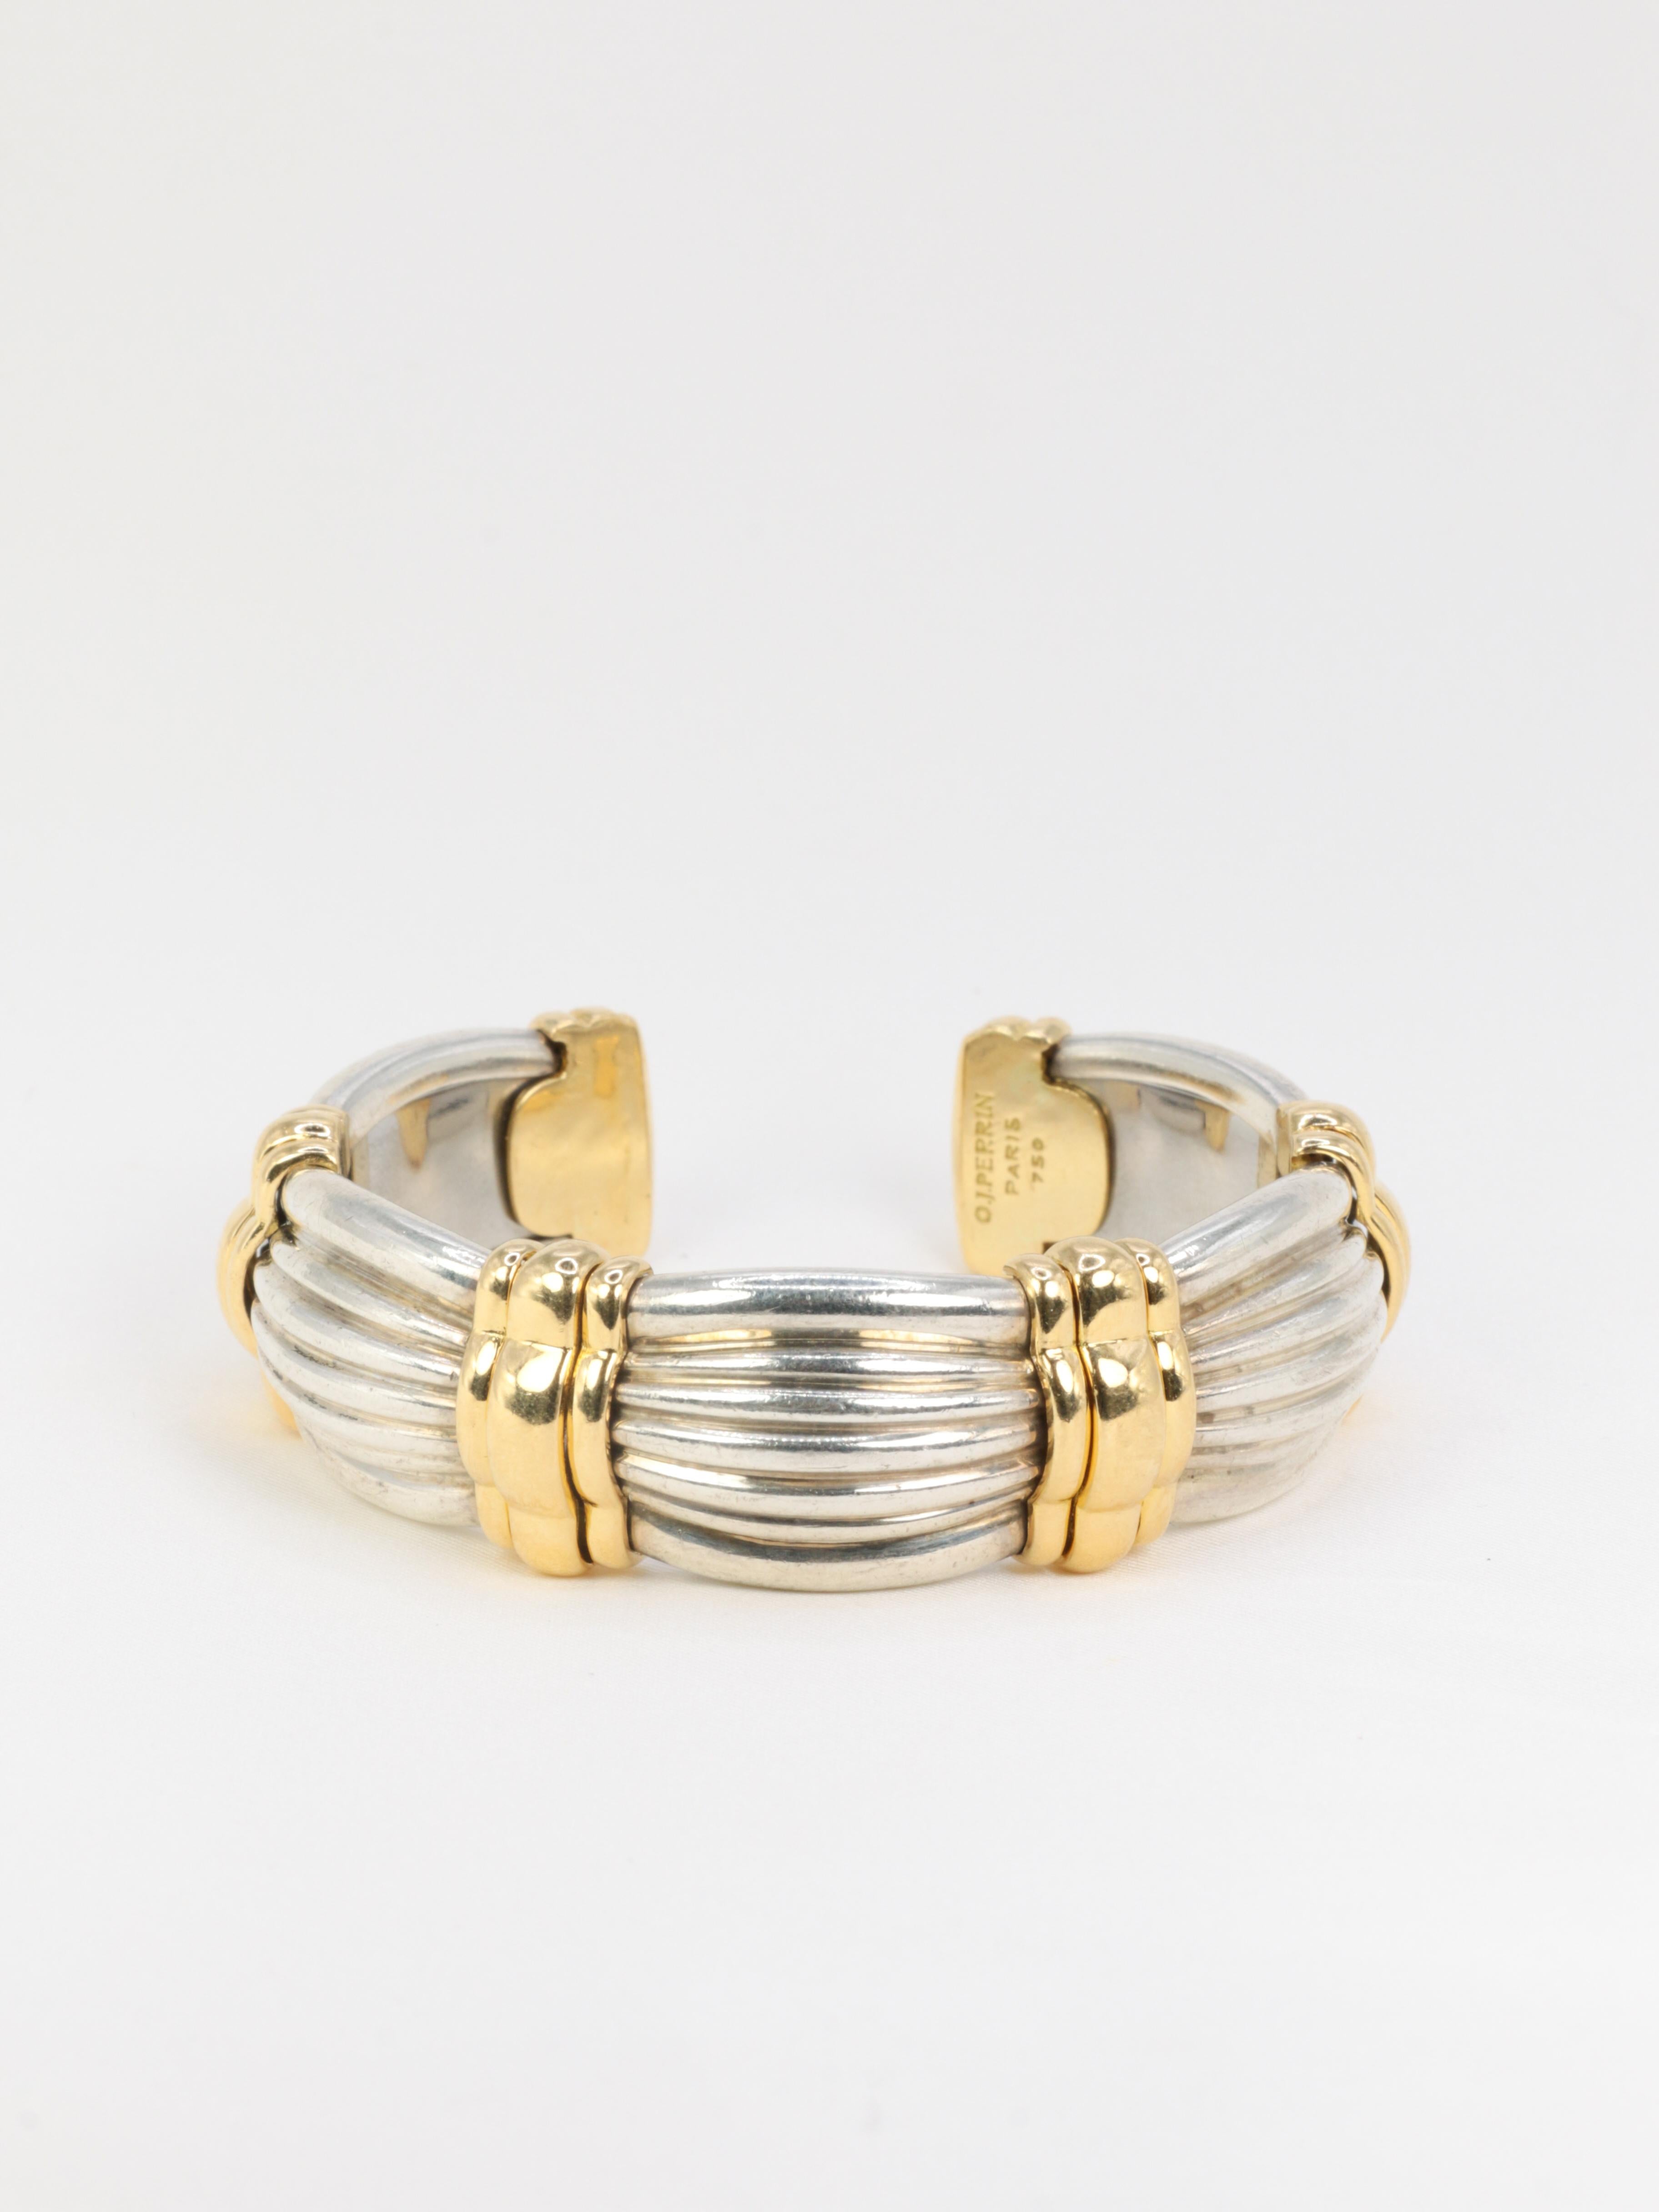 Bracelet Jonc semi-rigid signed O.J. PERRIN in 18k yellow gold (750°/°°) and silver with steel inner blade. Godronné model with 4 intermediate motifs in gold and the structure in silver
Work and hallmark of the Parisian workshop André Vassort
Circa